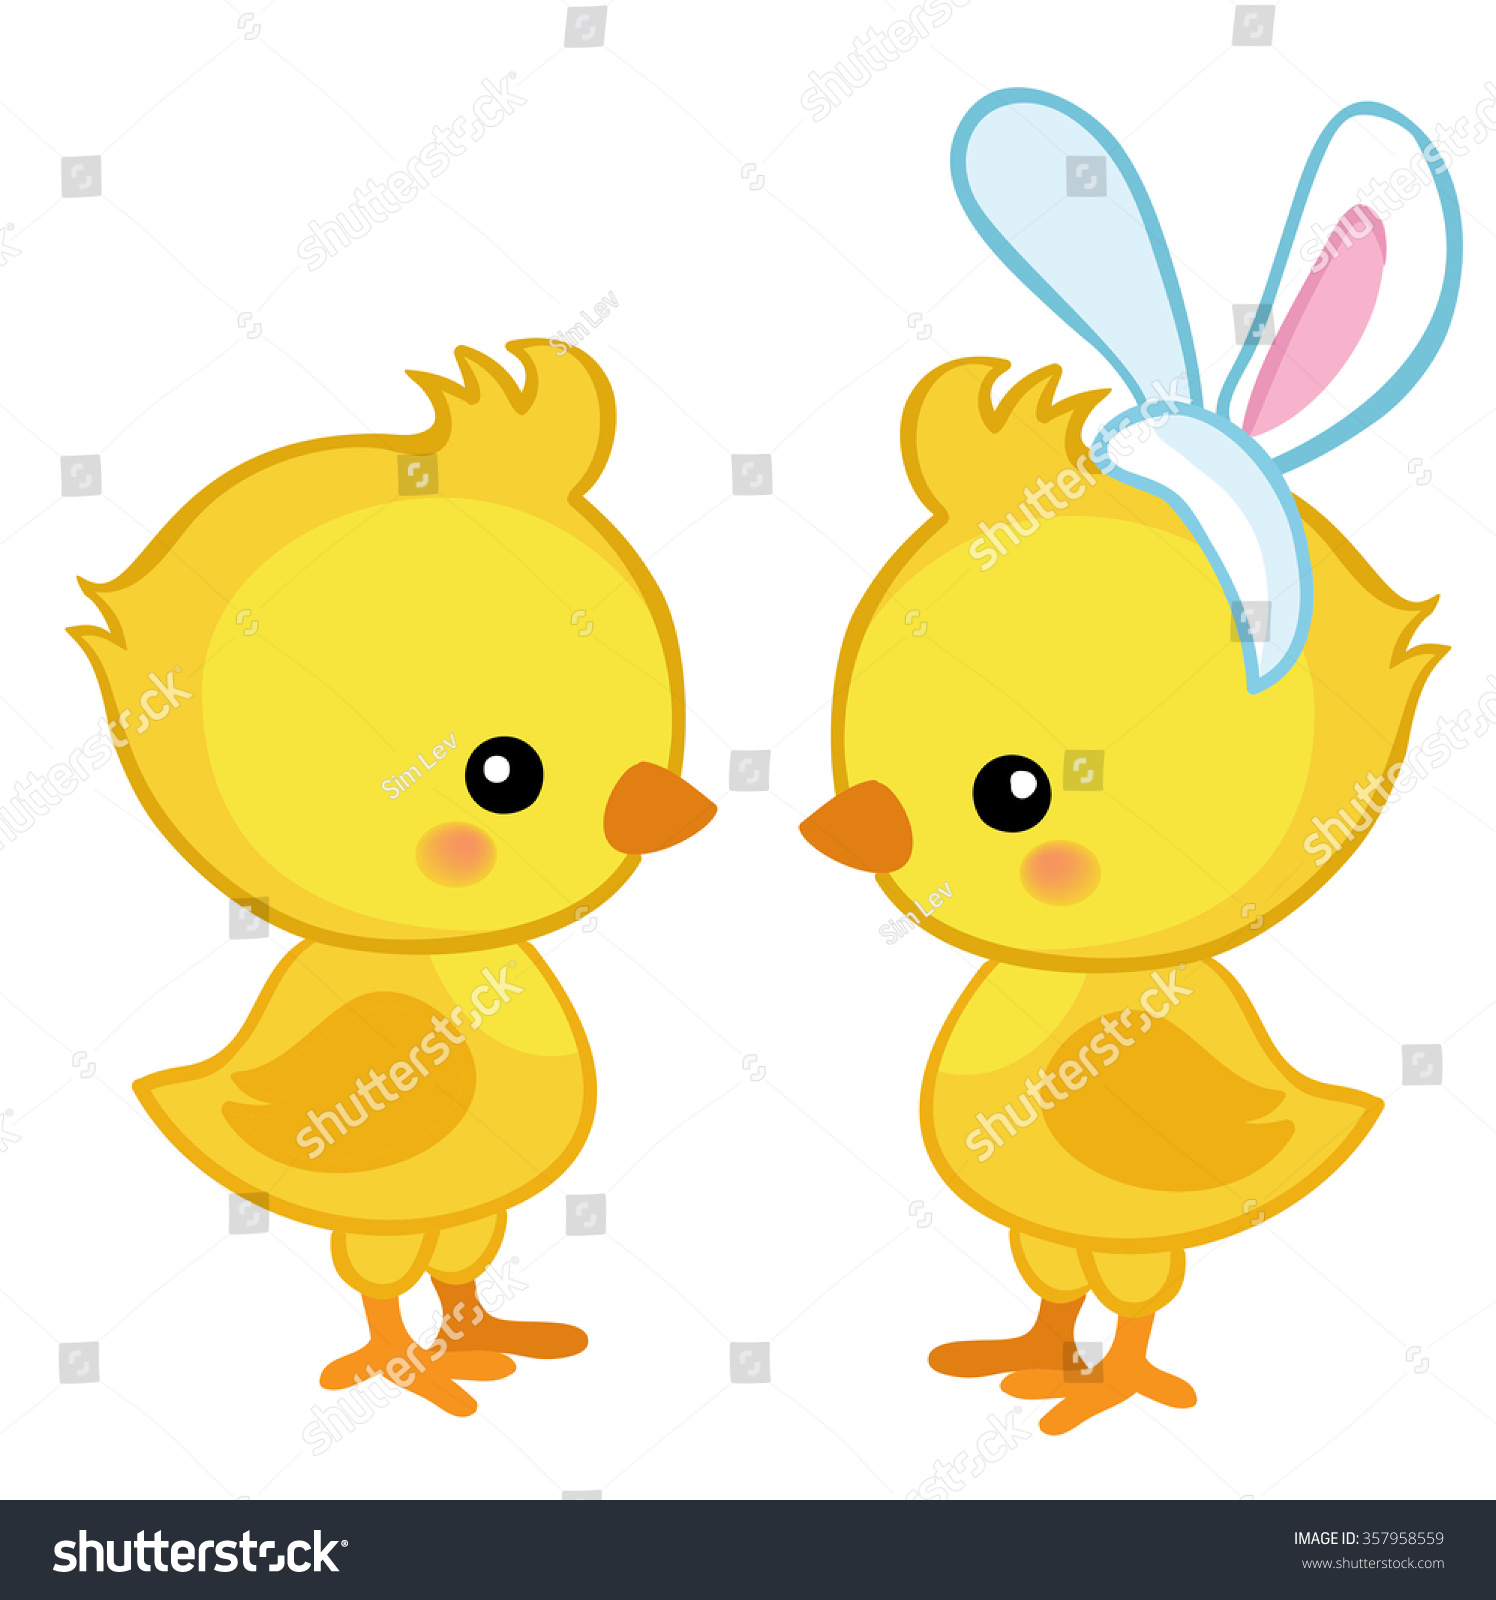 Cute easter chick photo